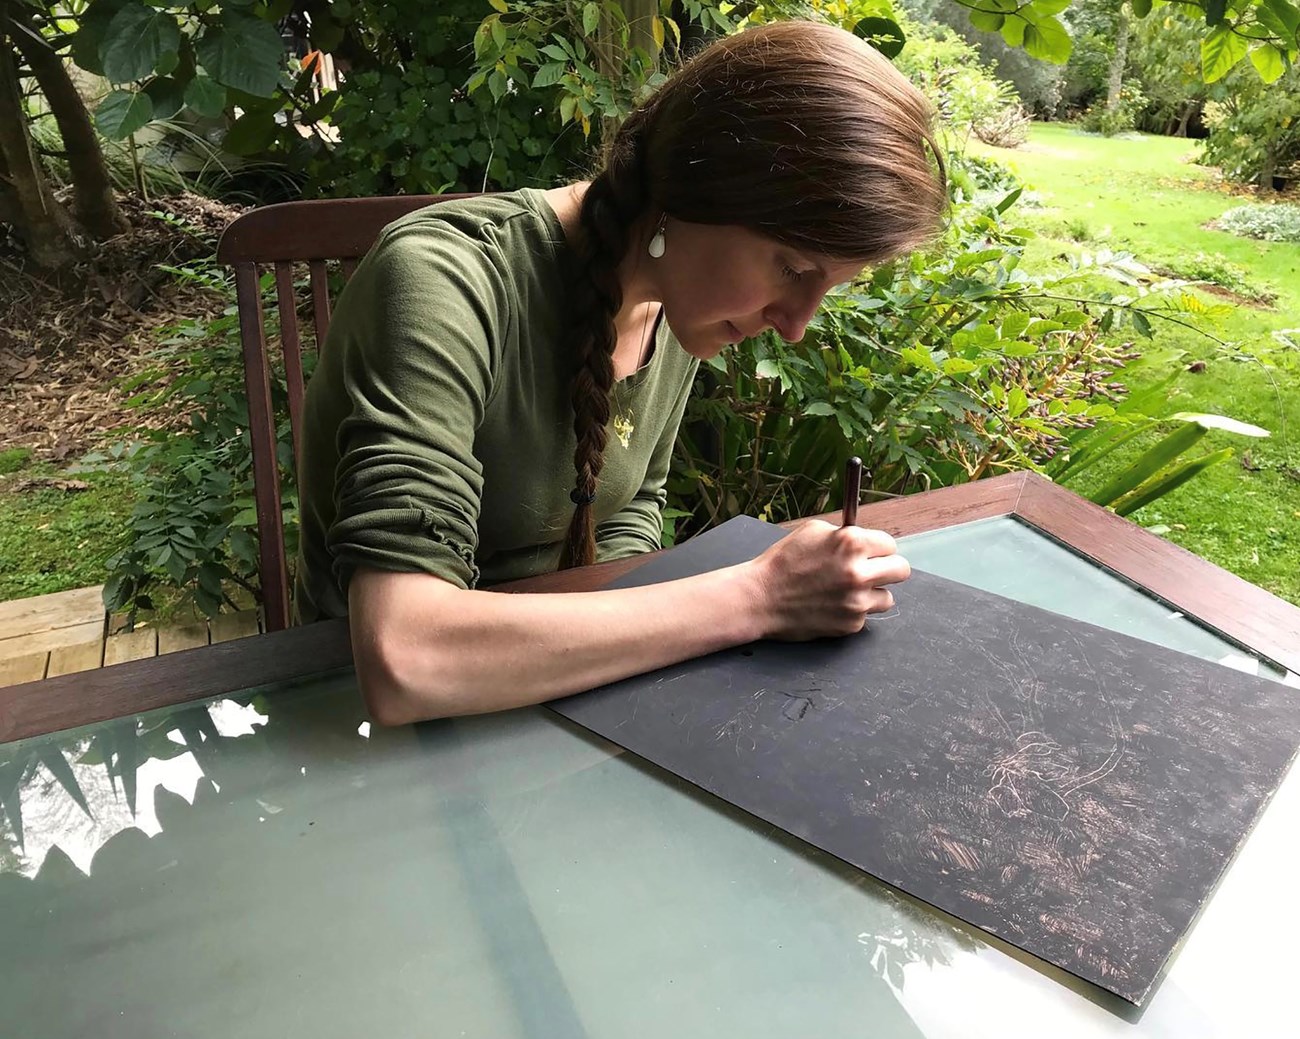 Woman leans over artwork in progress in an outdoor setting